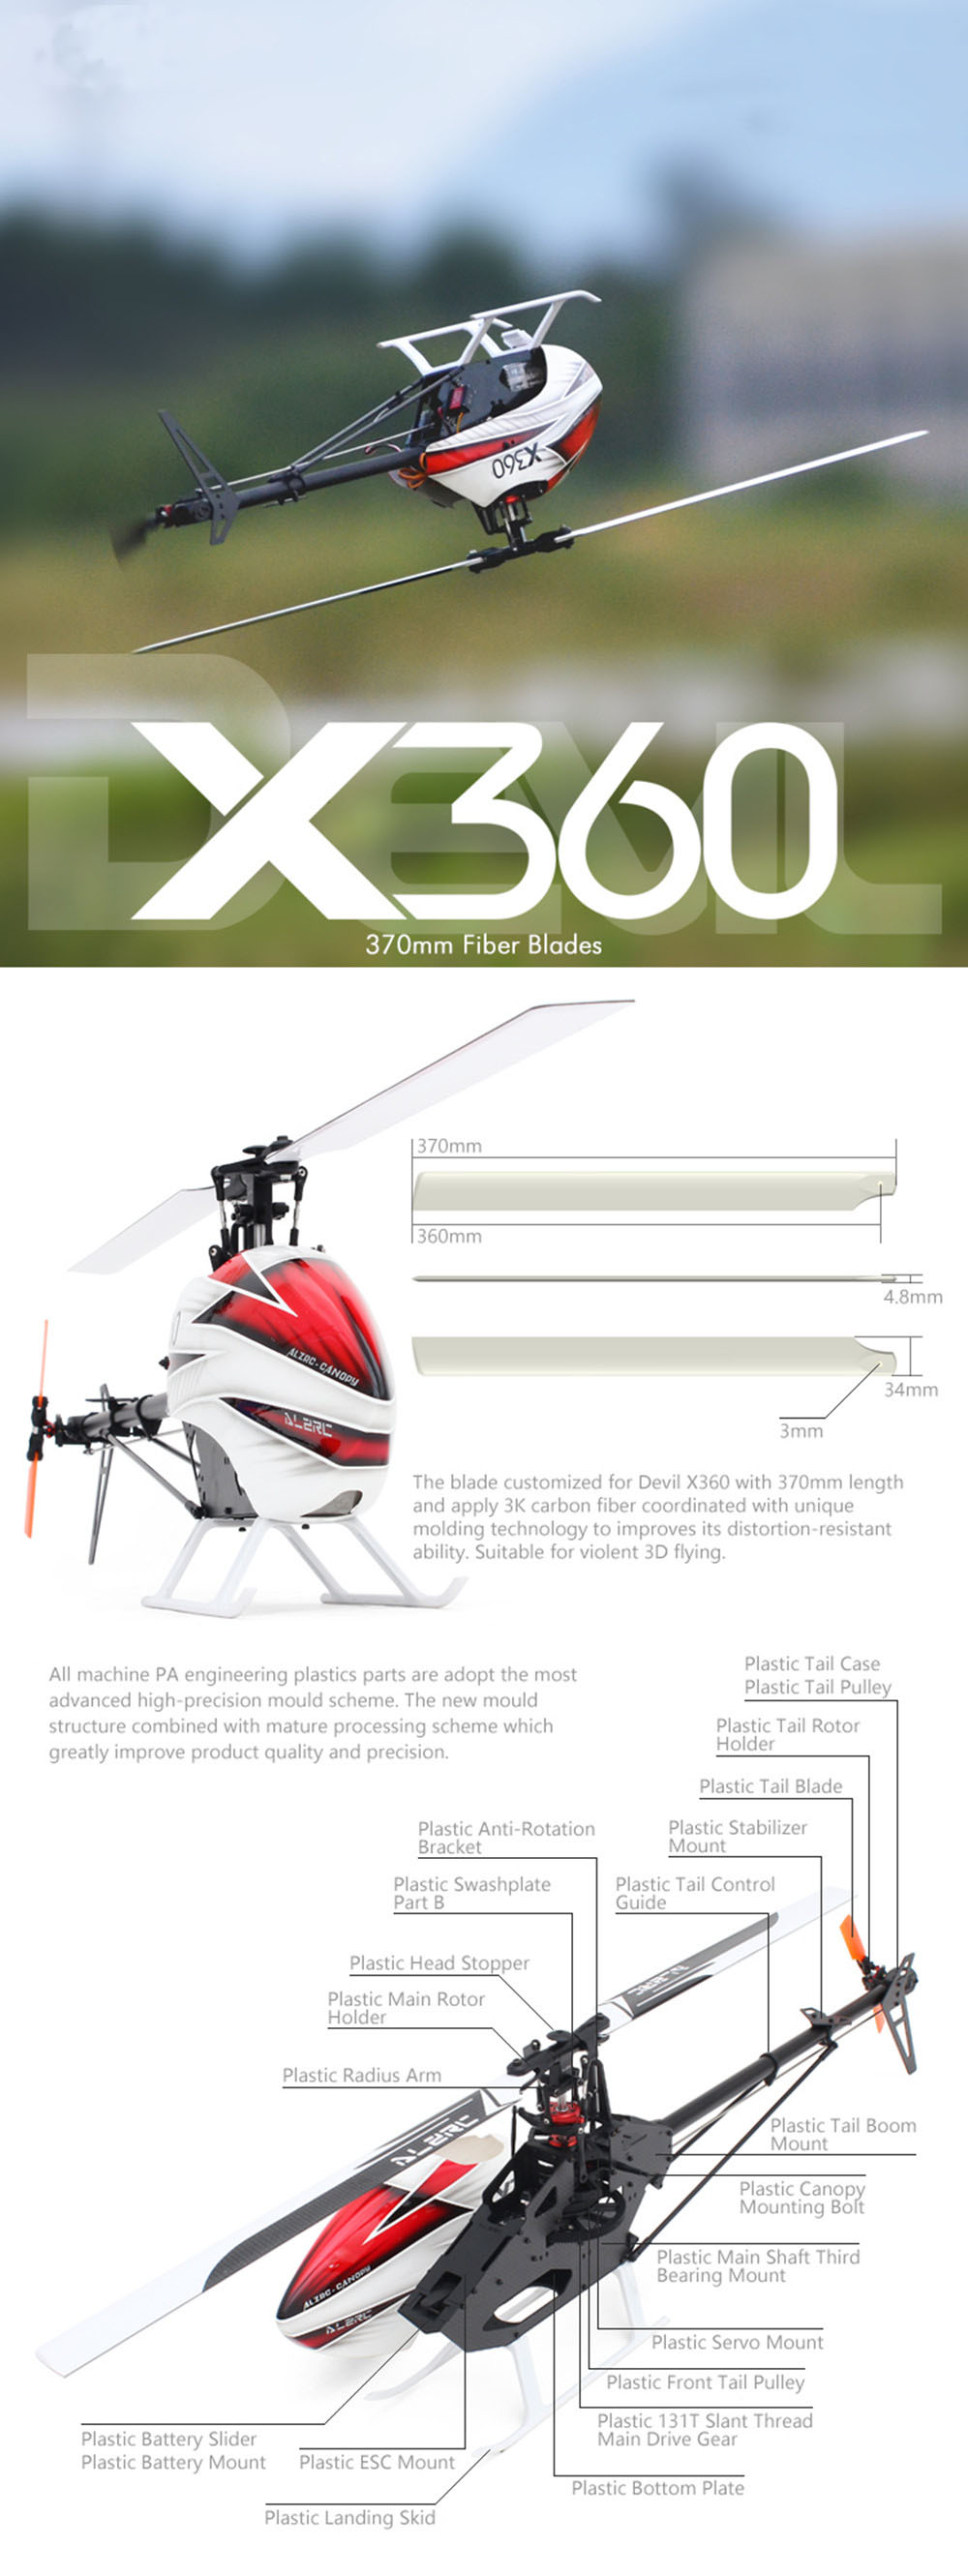 ALZRC-X360-FAST-FBL-6CH-3D-Flying-RC-Helicopter-Super-Combo-With-Motor-ESC-Servo-Gyro-1343938-1